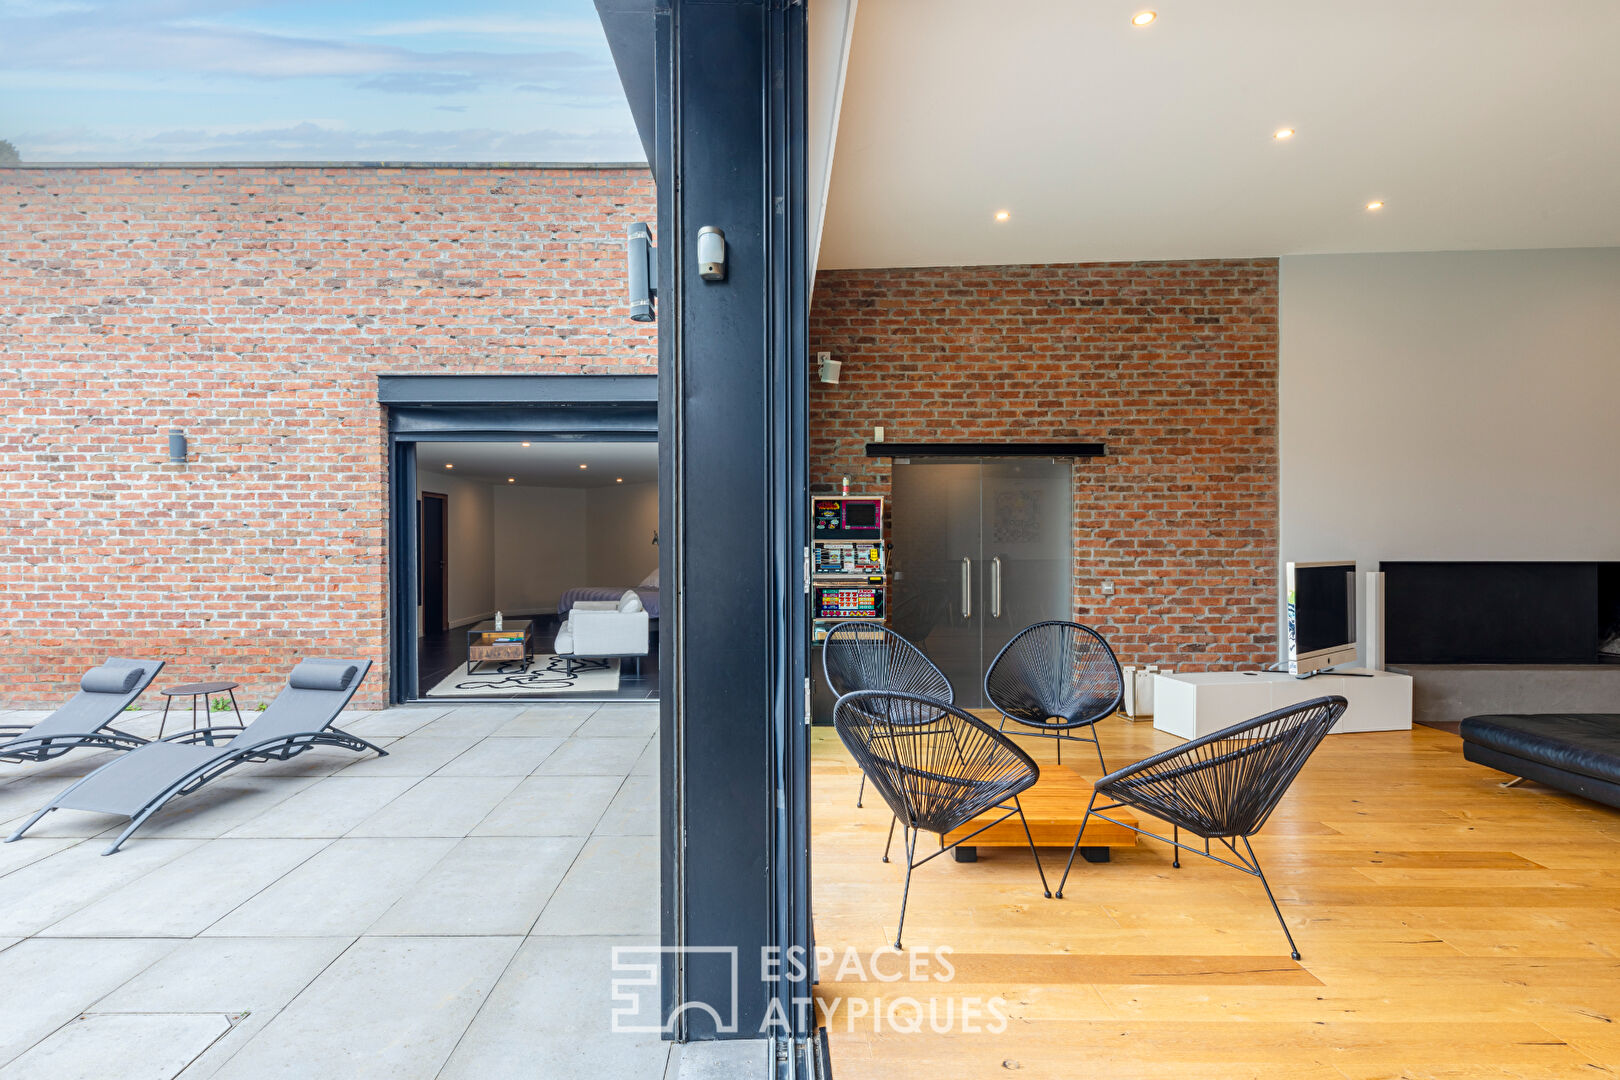 Exceptional loft of more than 500 sqm in sought-after area of Mantes la Jolie